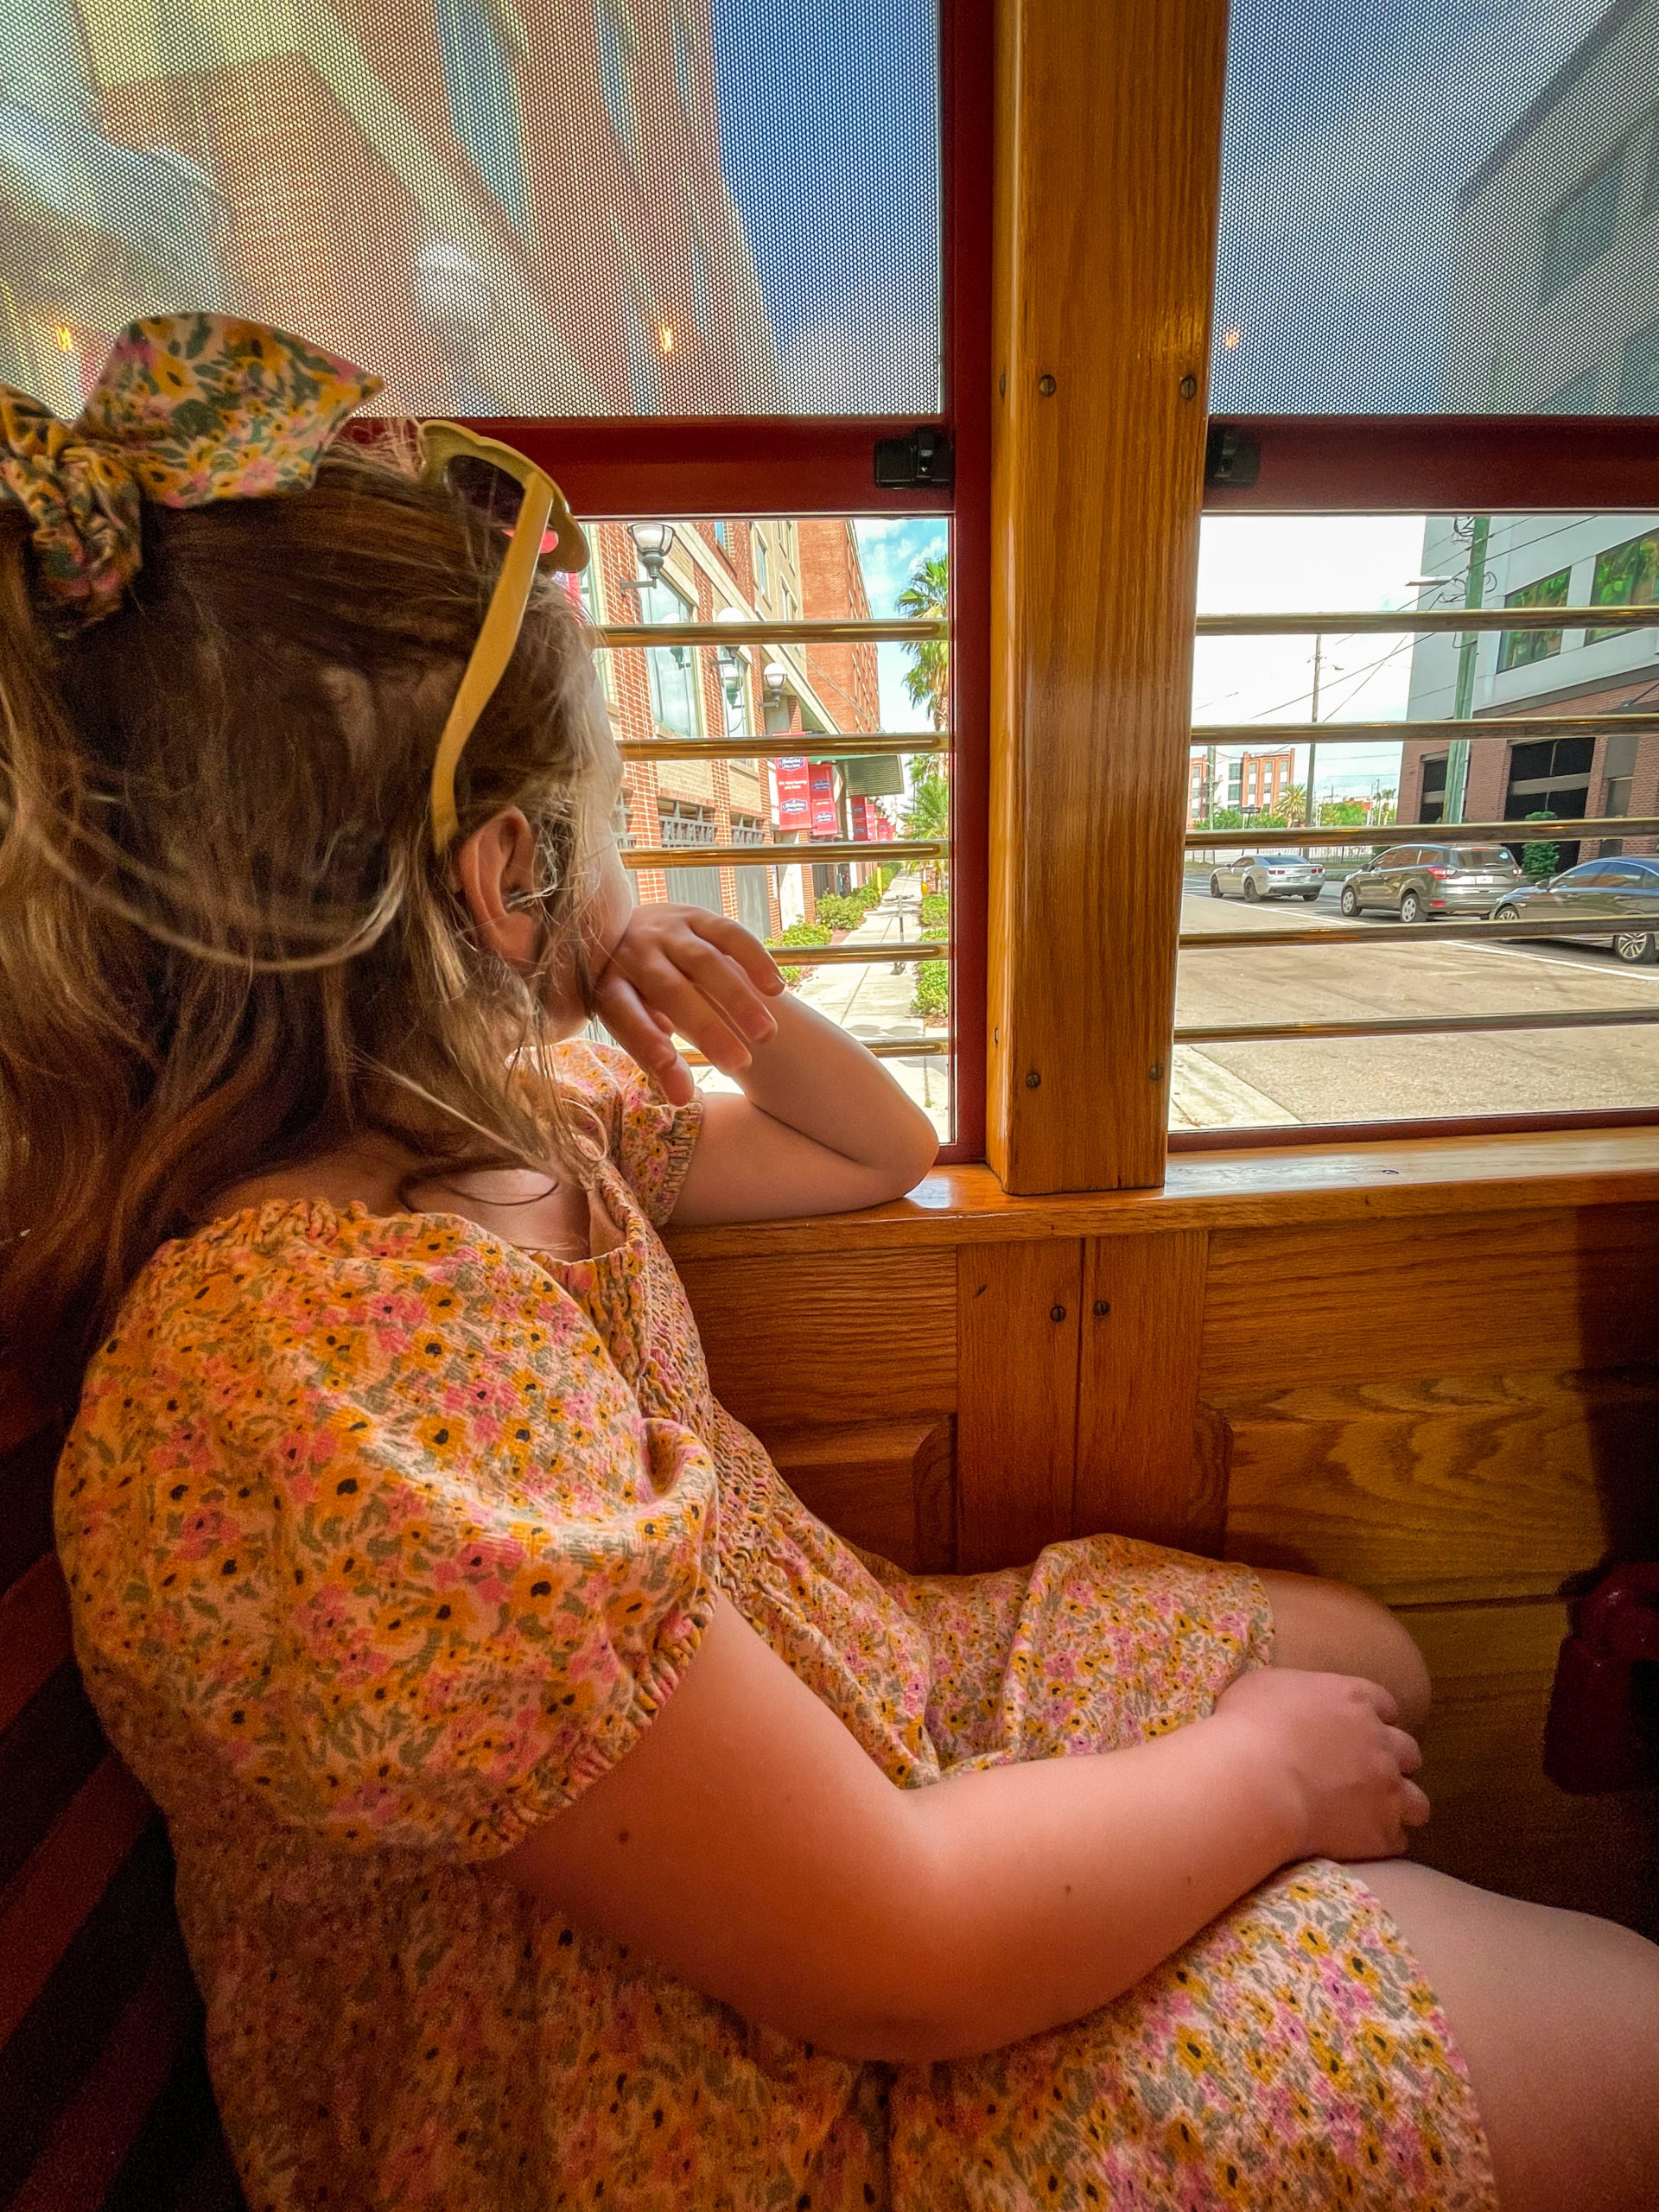 A young girl looks out the window while riding on the TECO Streetcar in historic Ybor City.